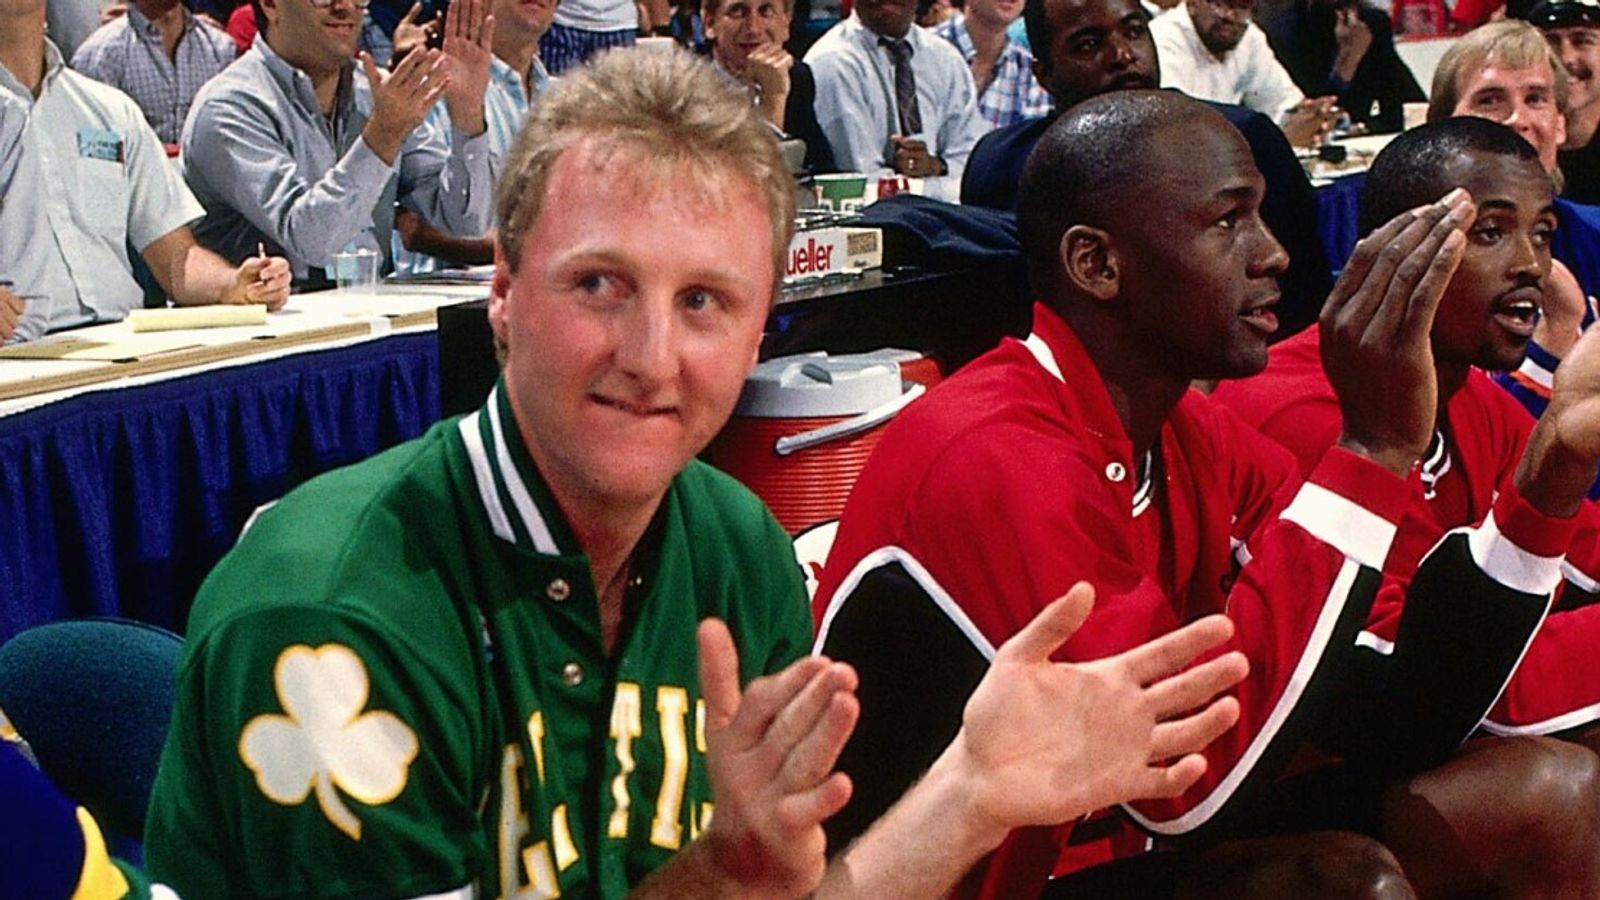 Larry Bird wins 1988 3-point Contest in warm-up jacket